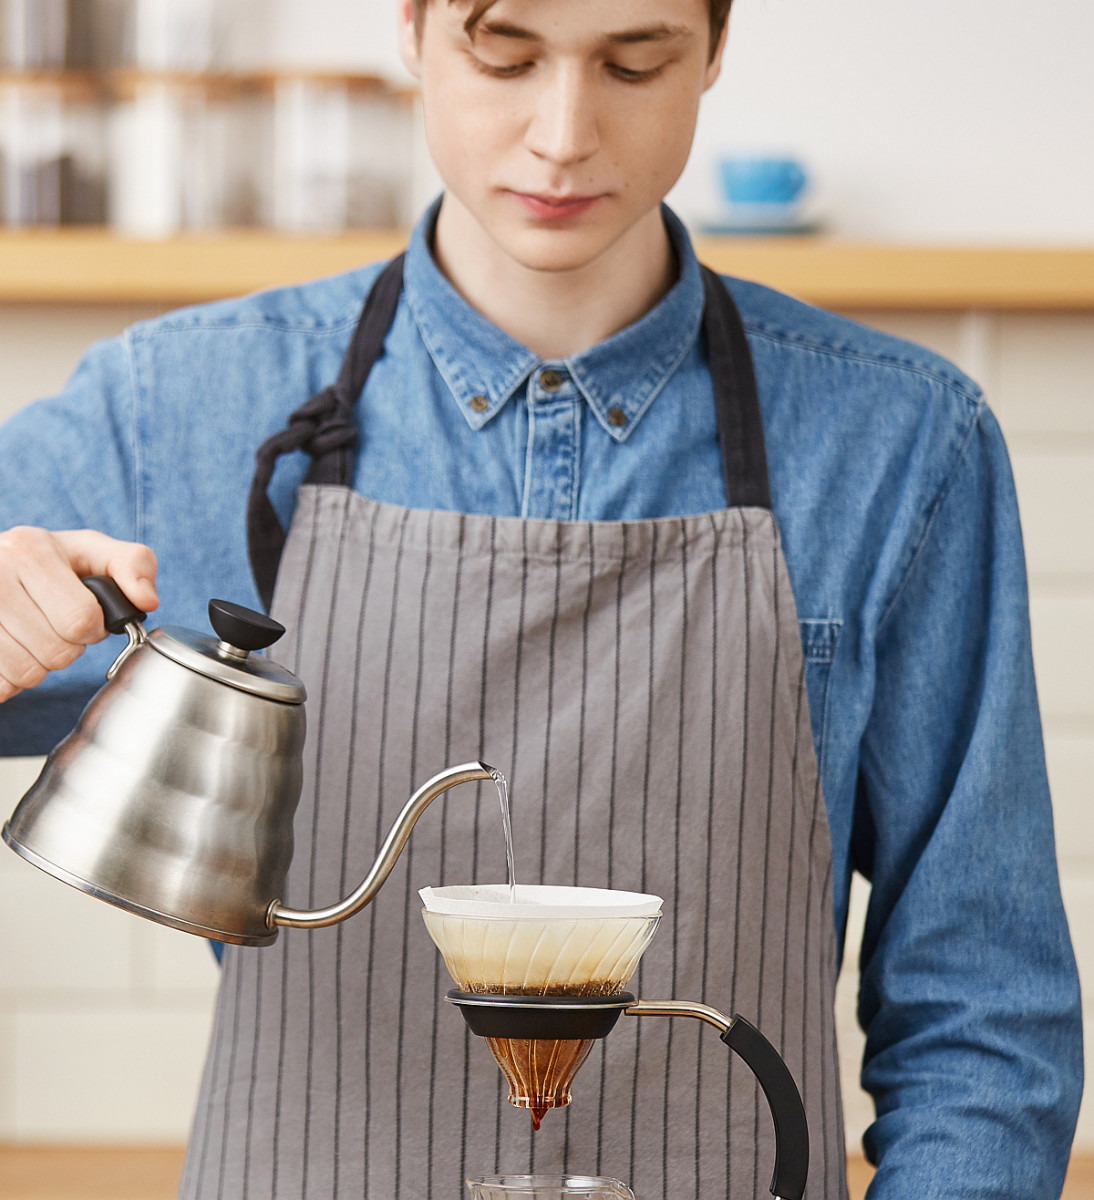 Barista making pour-over coffee